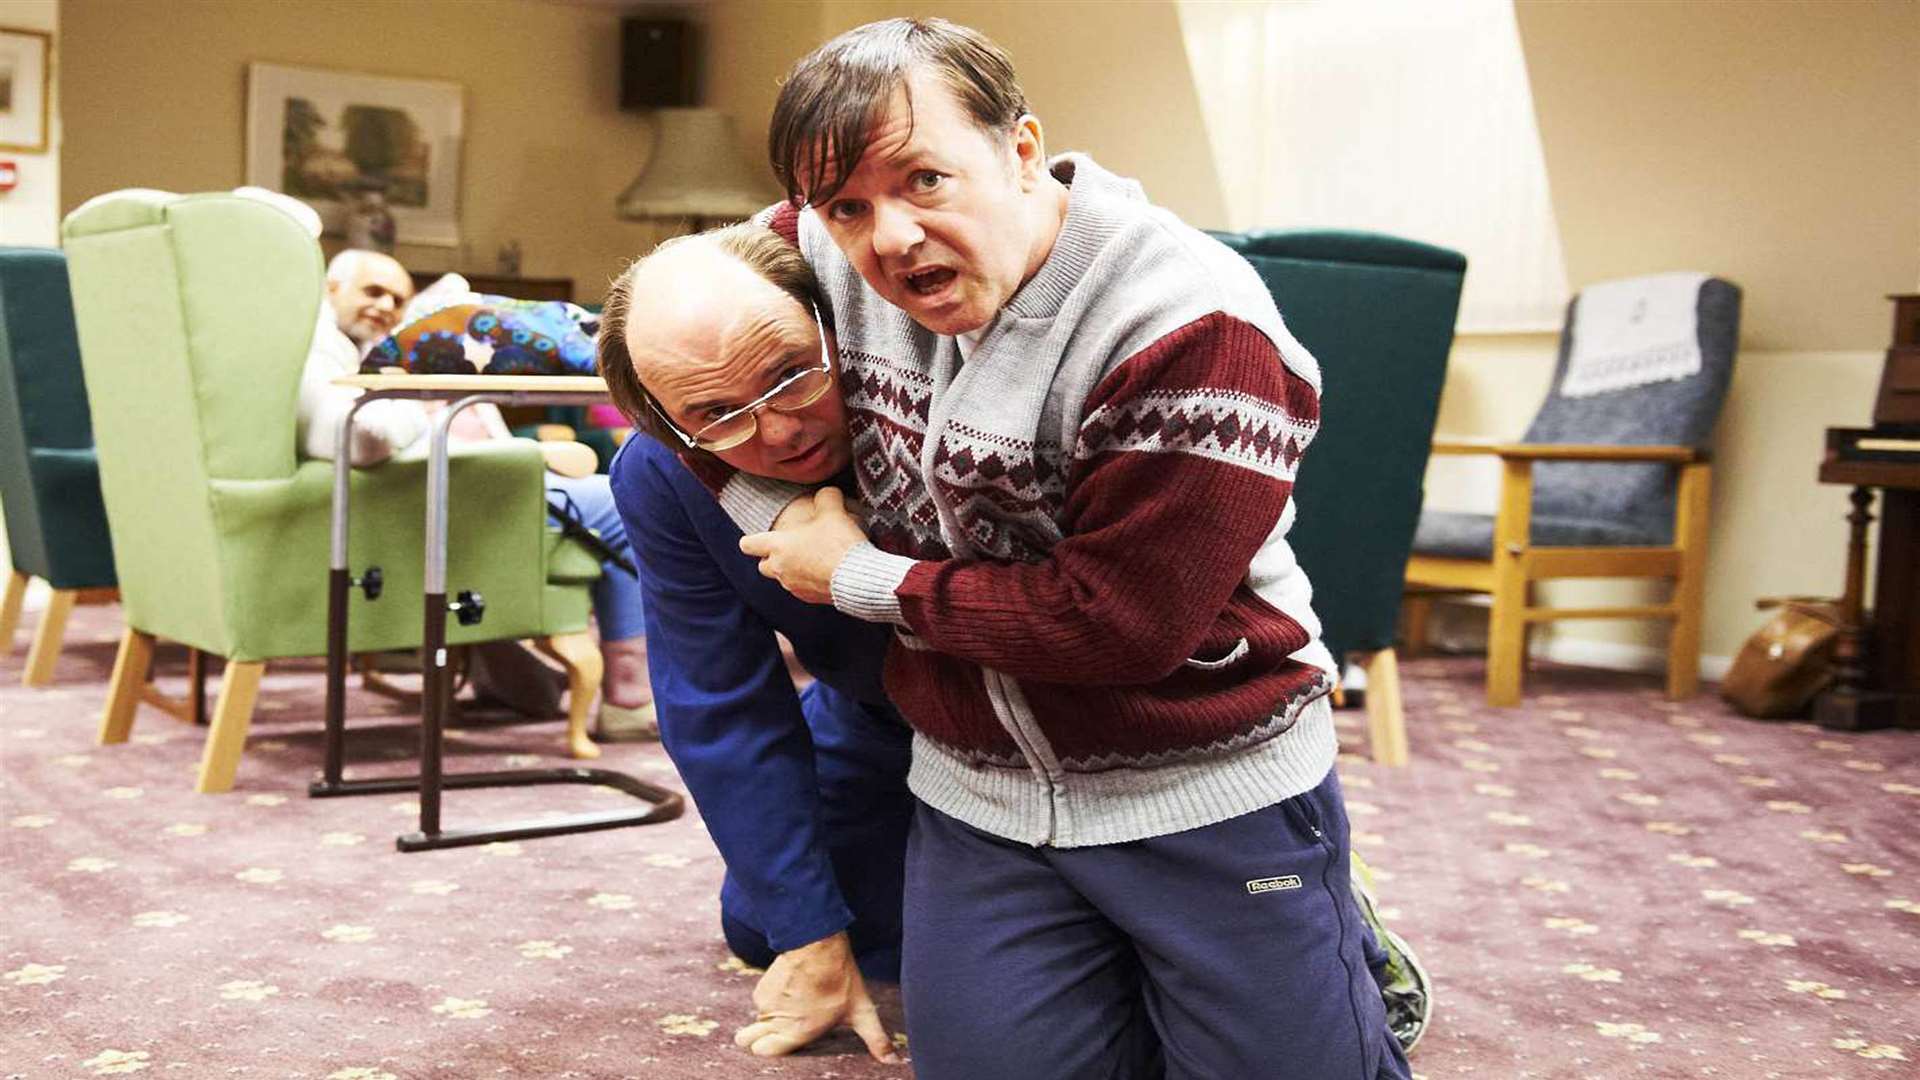 Care home workers like the loveable Derek face an uncertain future as their employers face rising wage bills. Picture: Channel 4